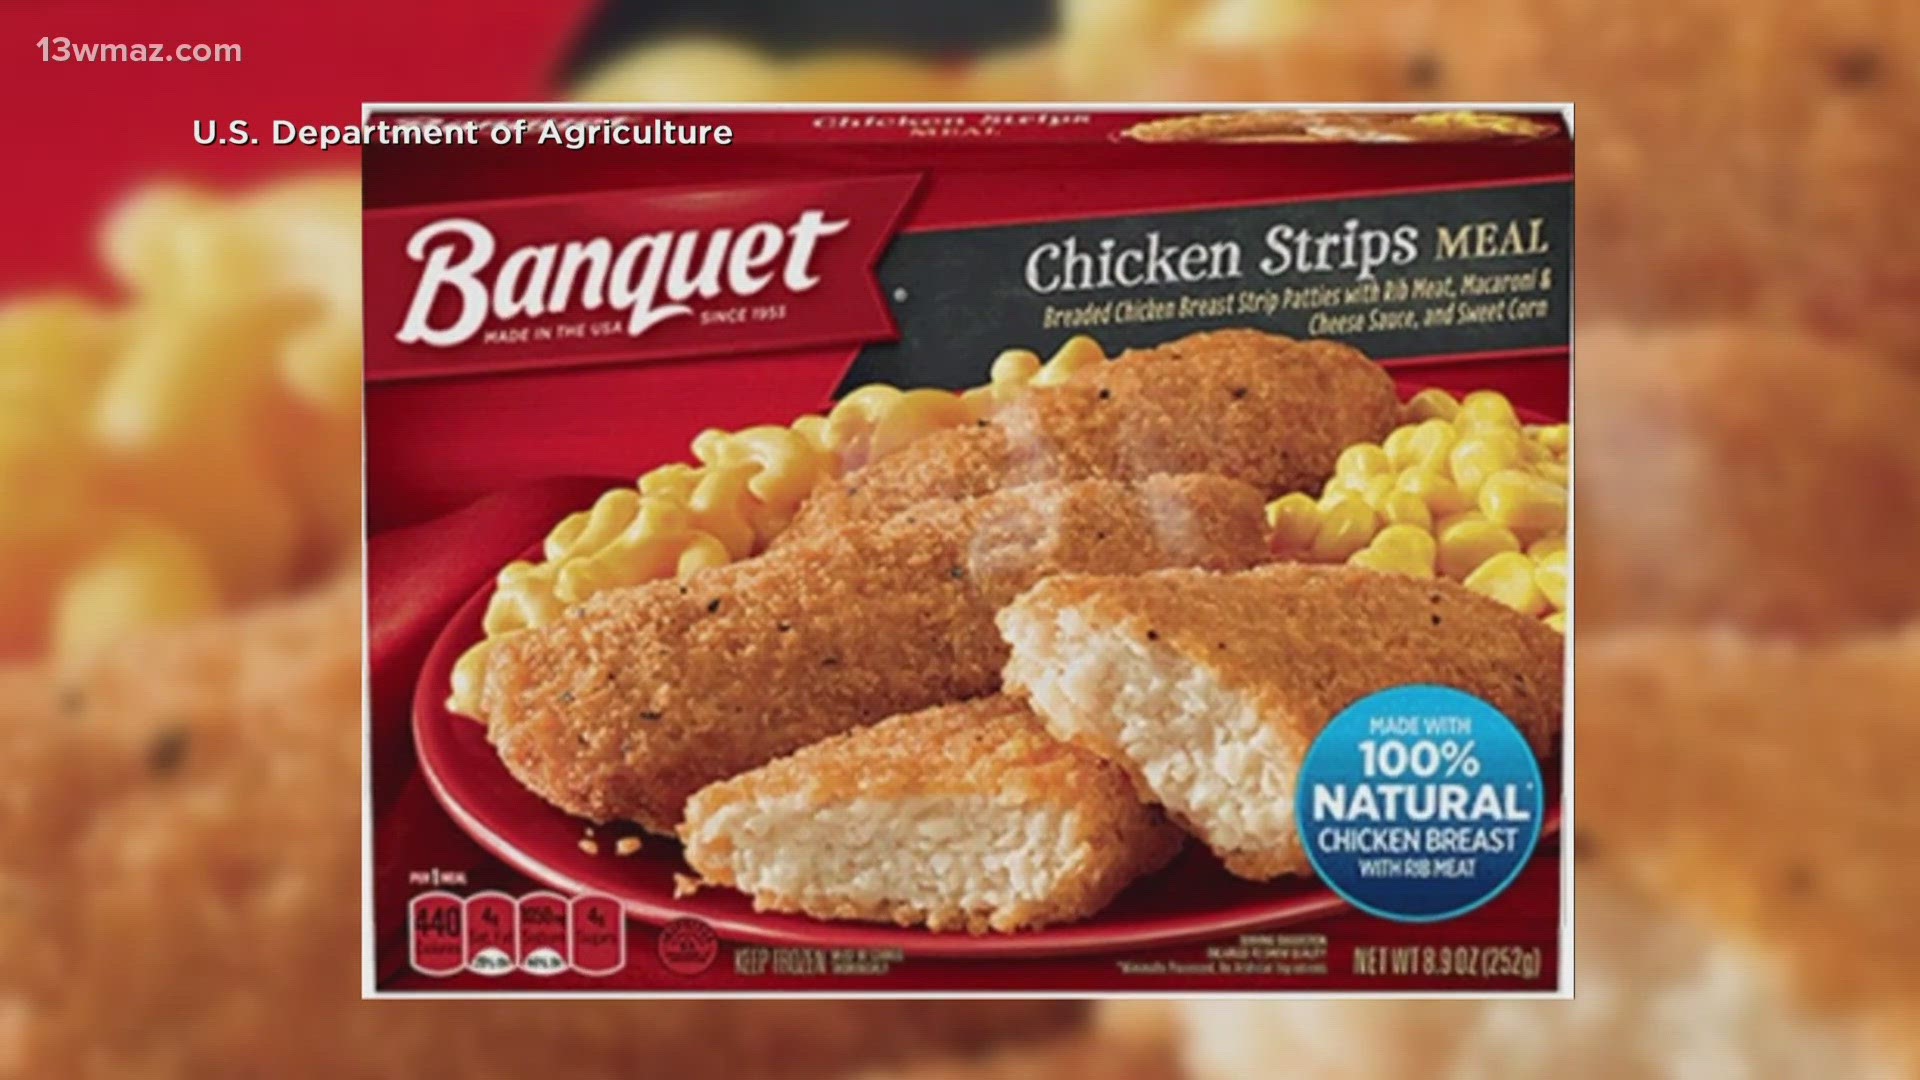 The chicken strips could have plastic in them, so be sure to check if your frozen chicken strips are affected by the recall.